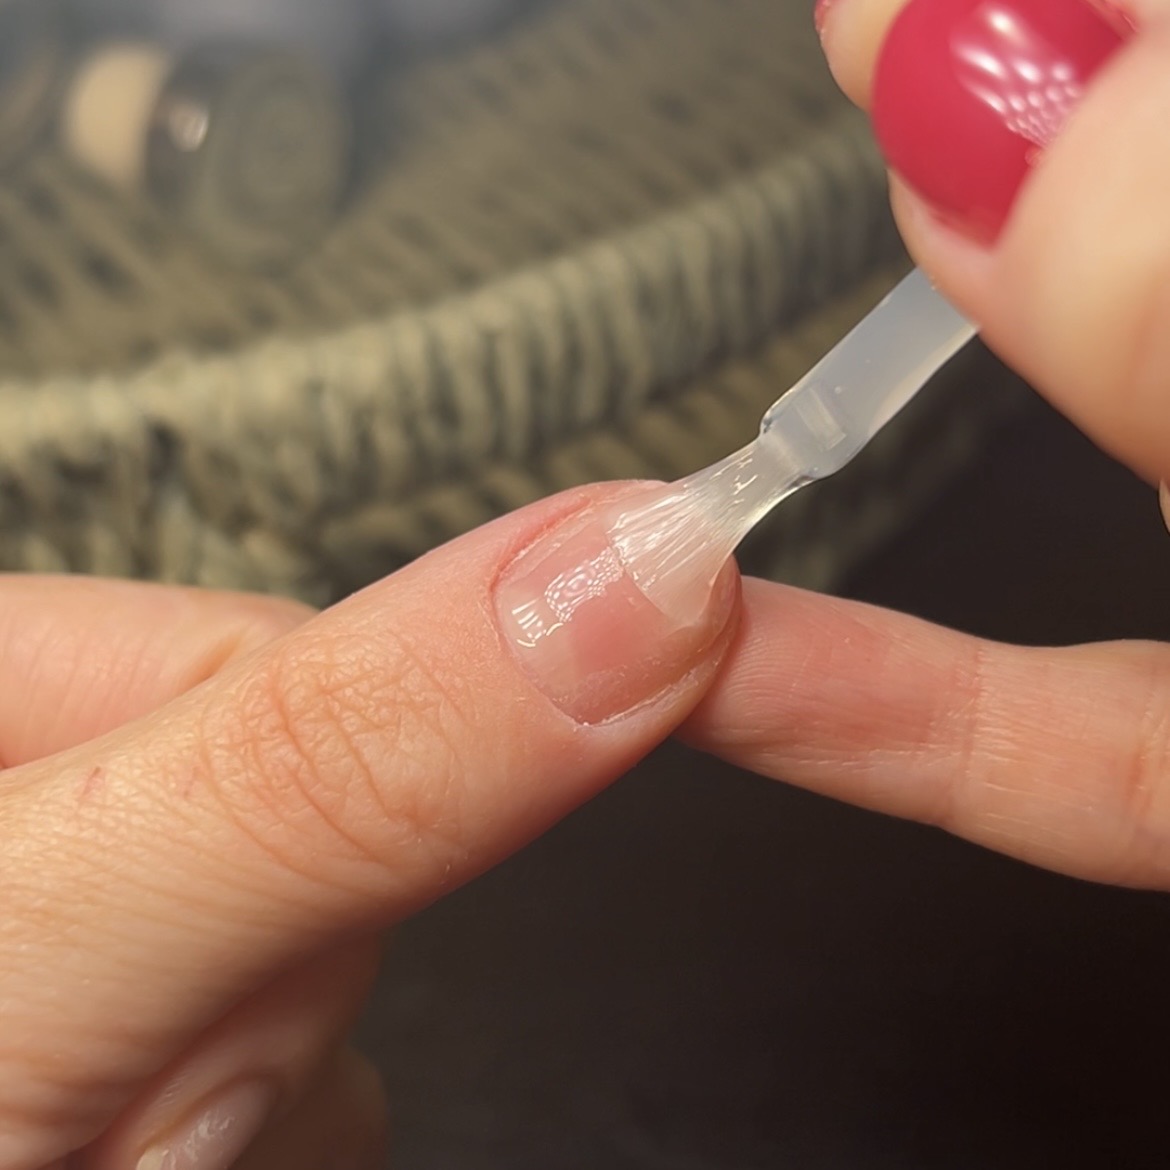 Do your nails need a break from polish?